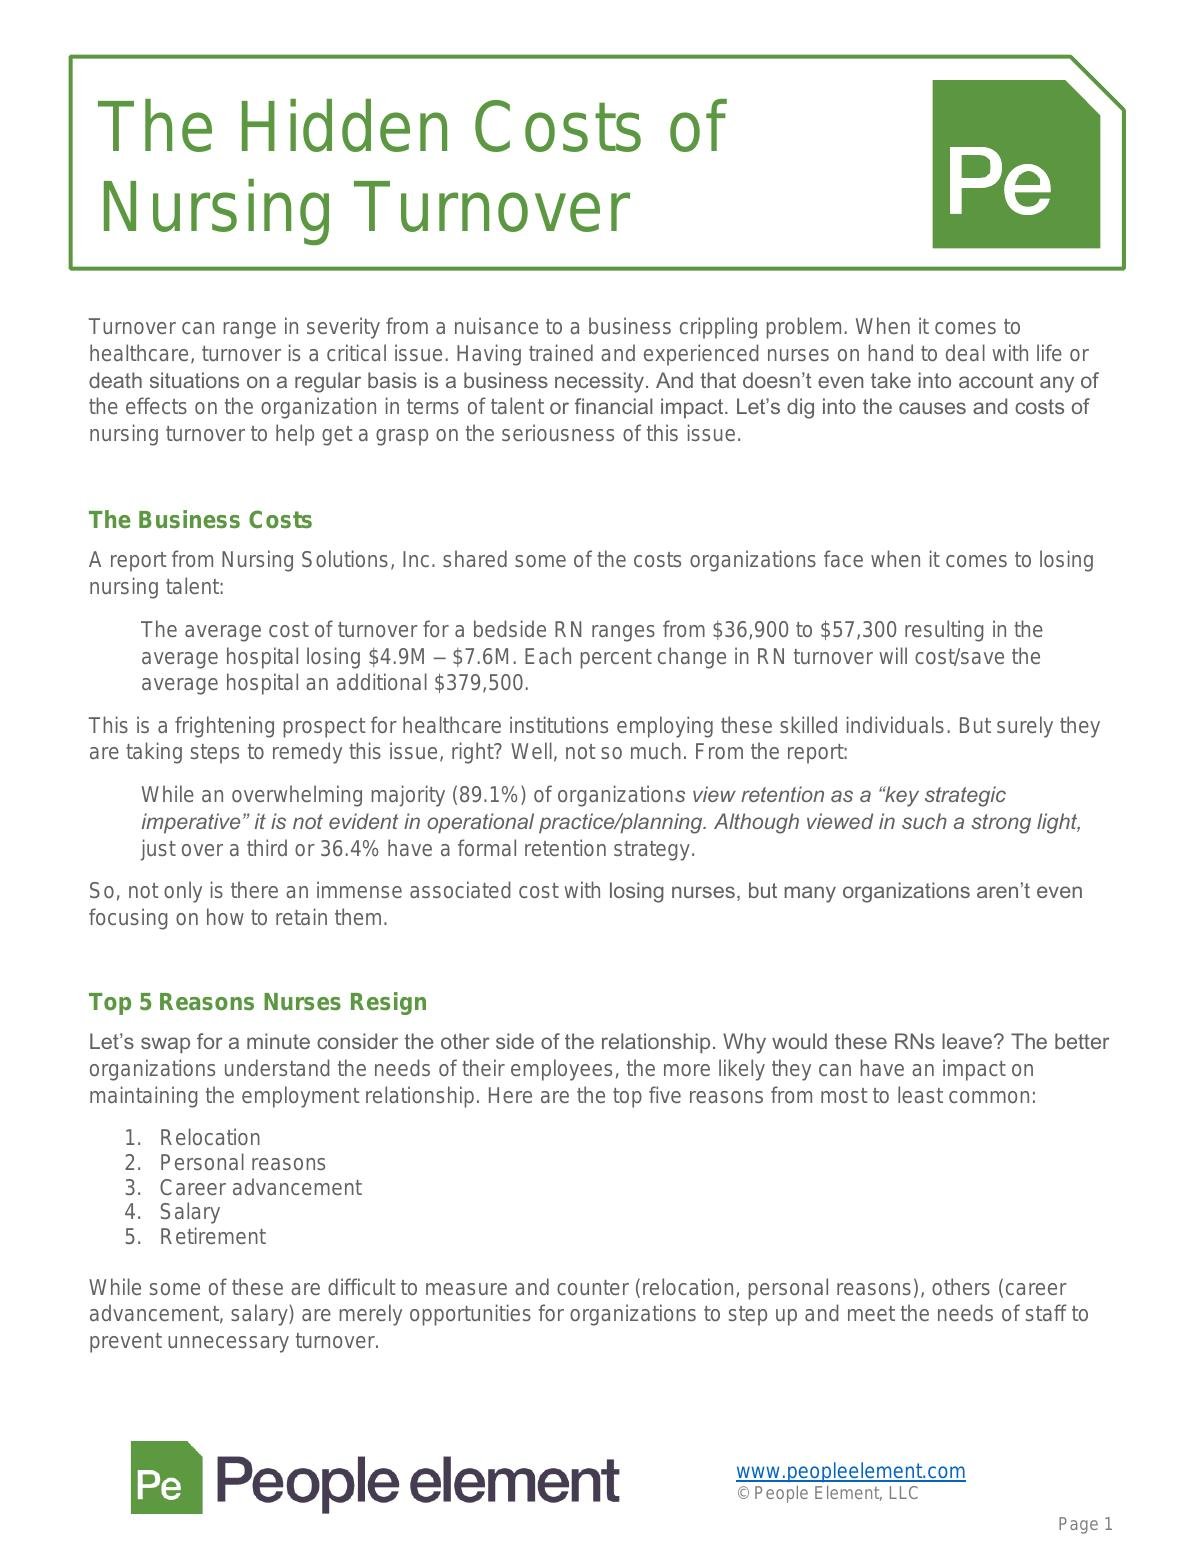 The Hidden Costs of Nursing Turnover